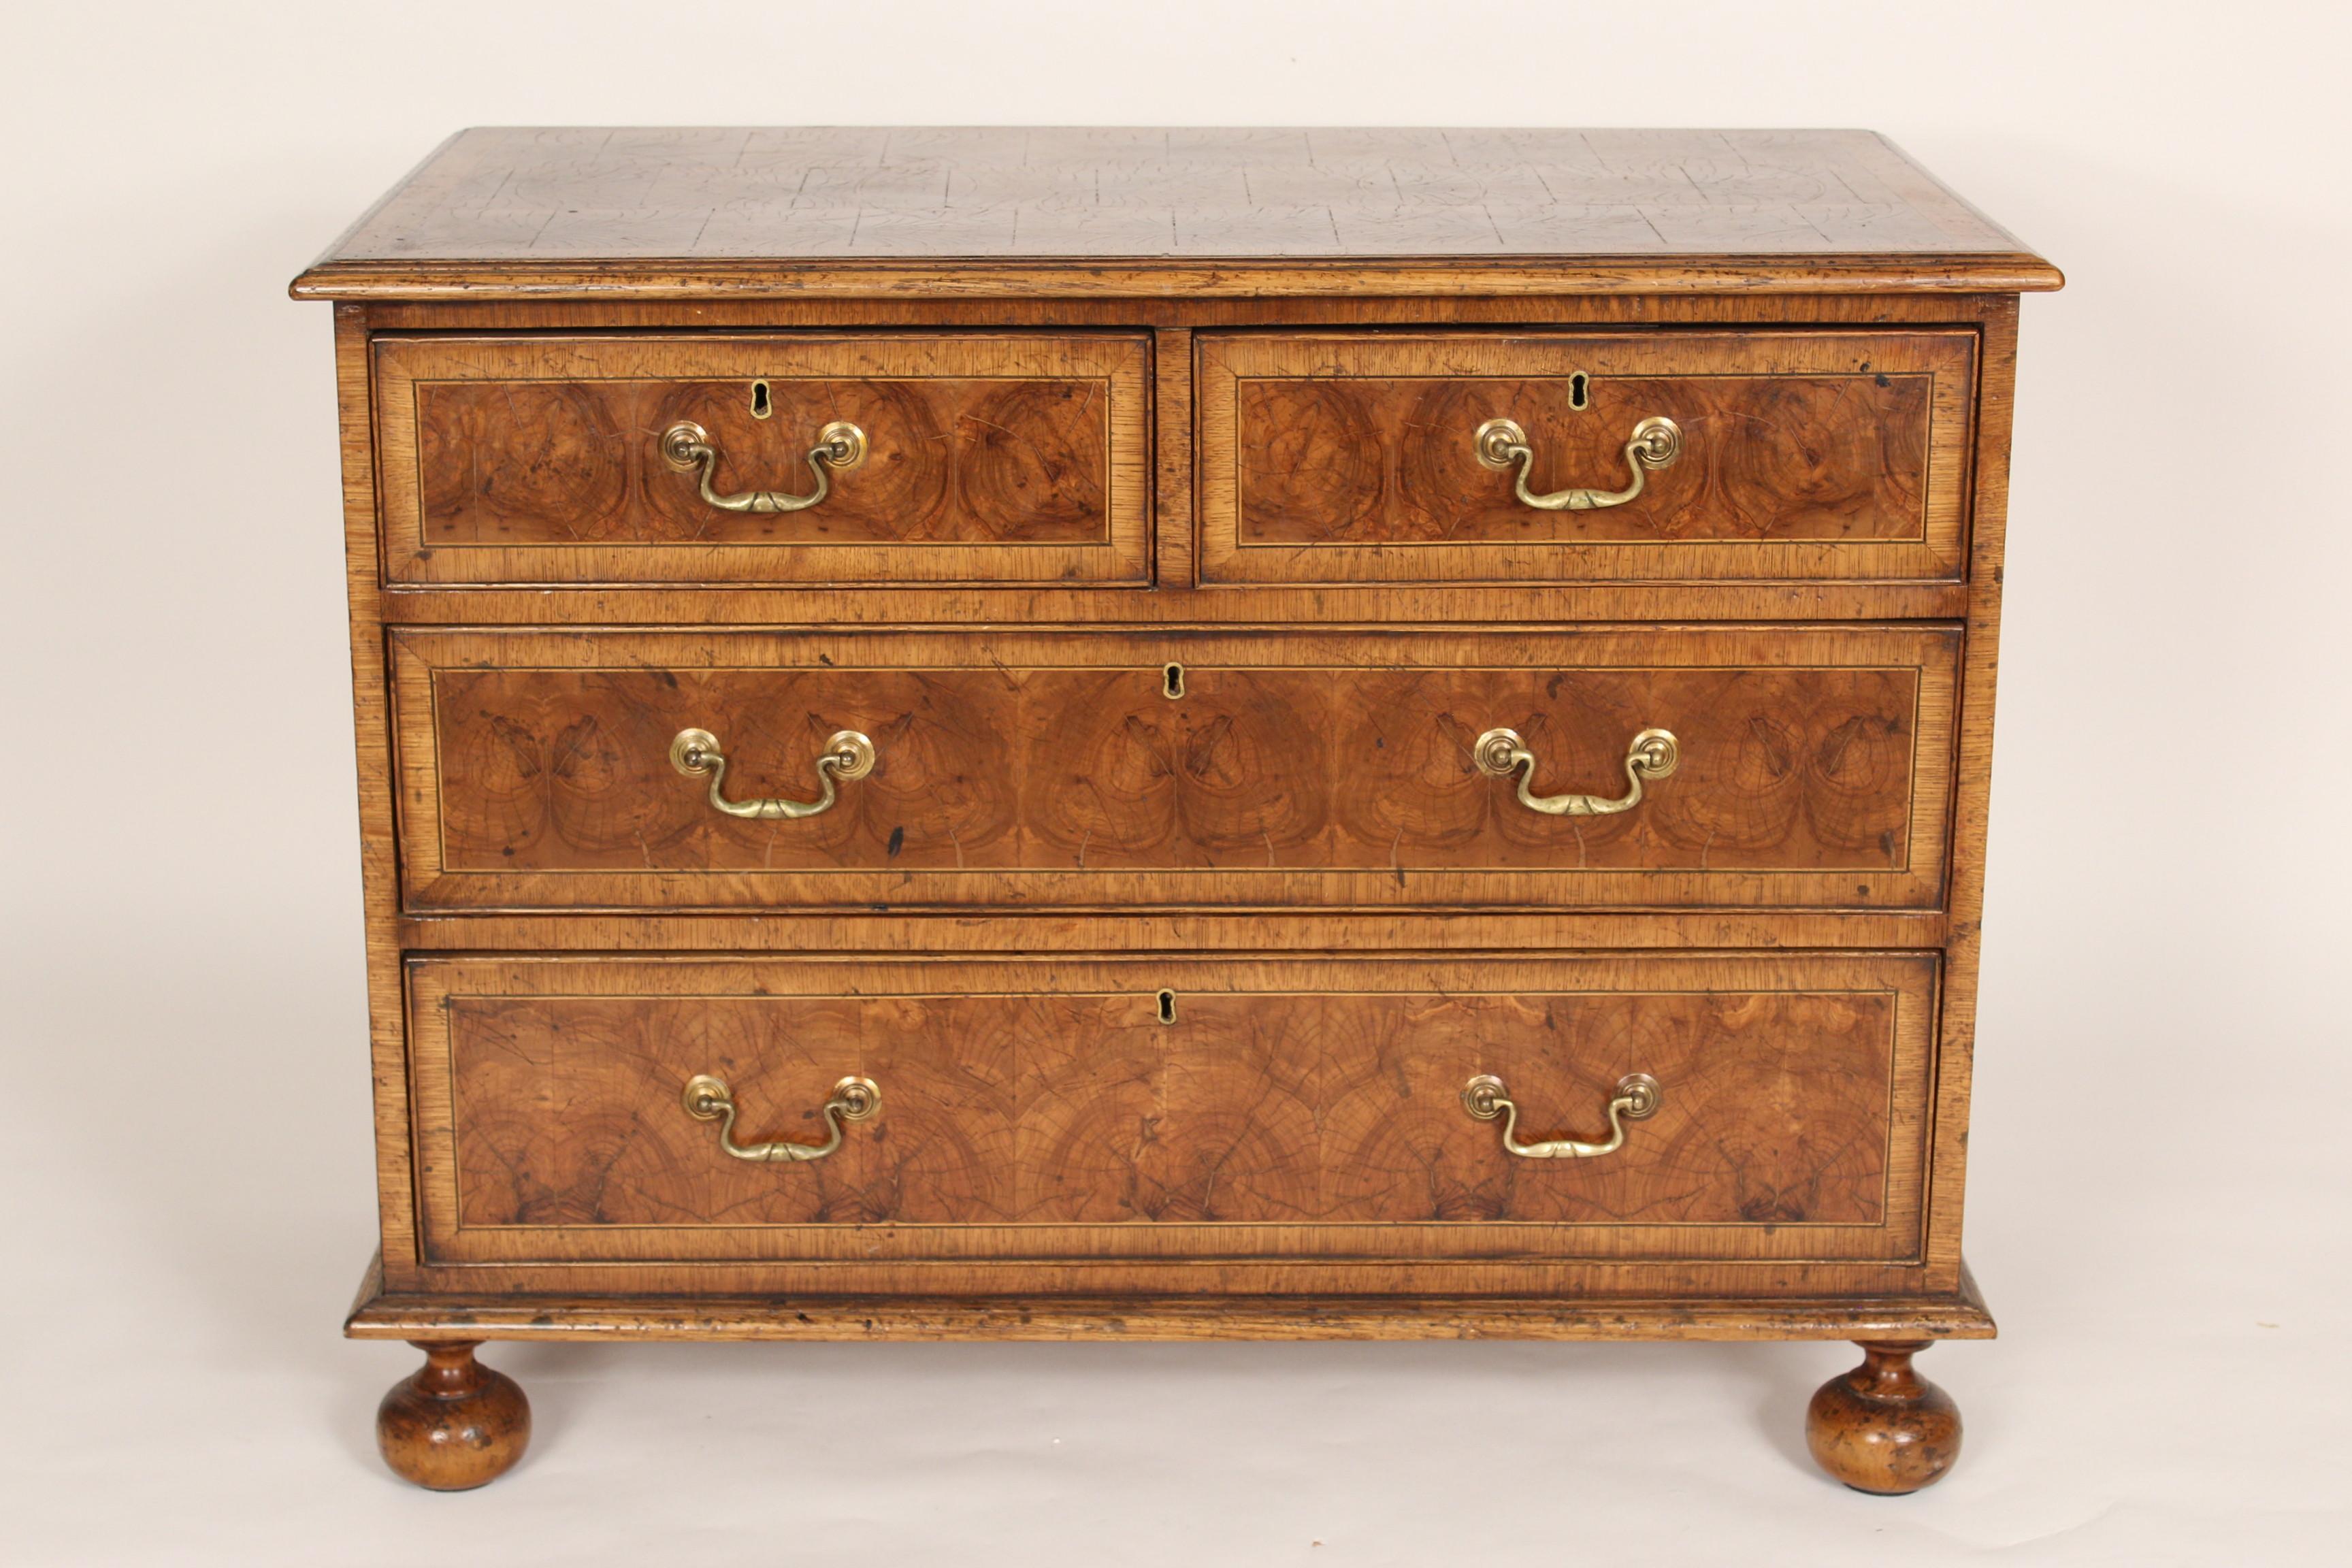 William & Mary style oyster burl chest of drawers, made in England, circa 1950's. With oak cross banding on top and front. Sides are oak with cross banded oak. Hand dove tailed drawer construction. Locks stamped made in England. The wood is